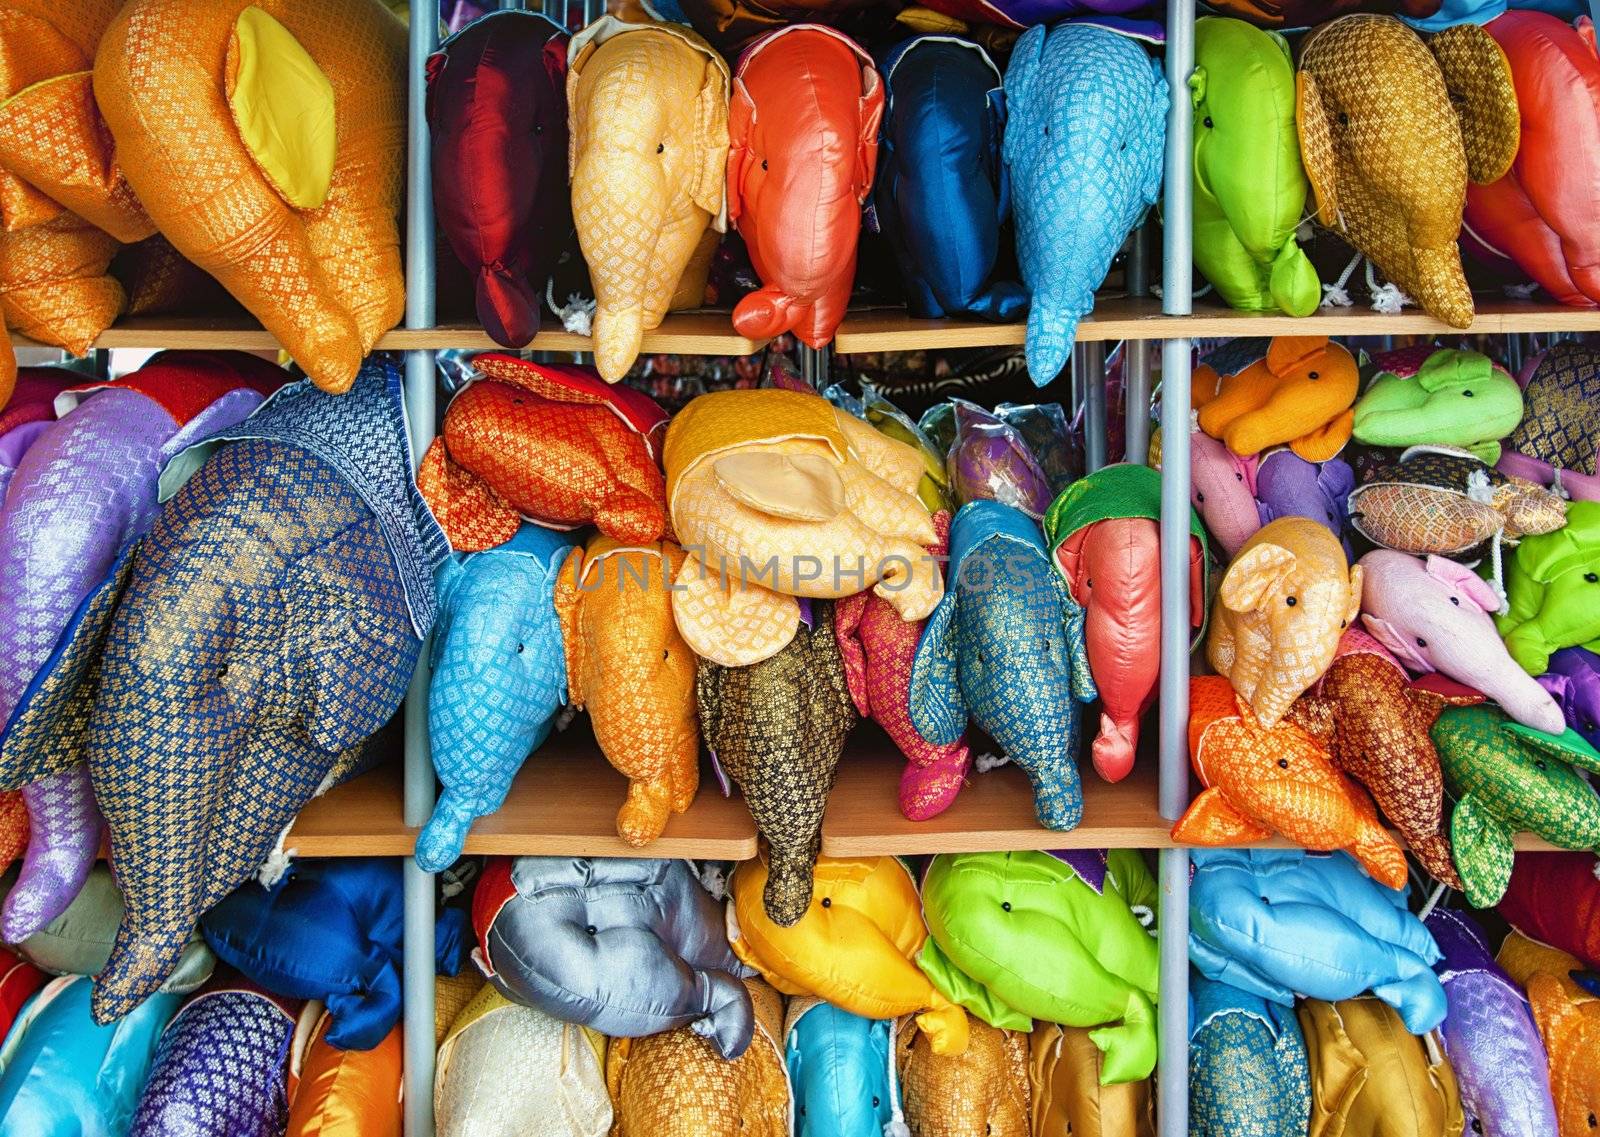 stuffed elephant toys for sale in pattaya thailand